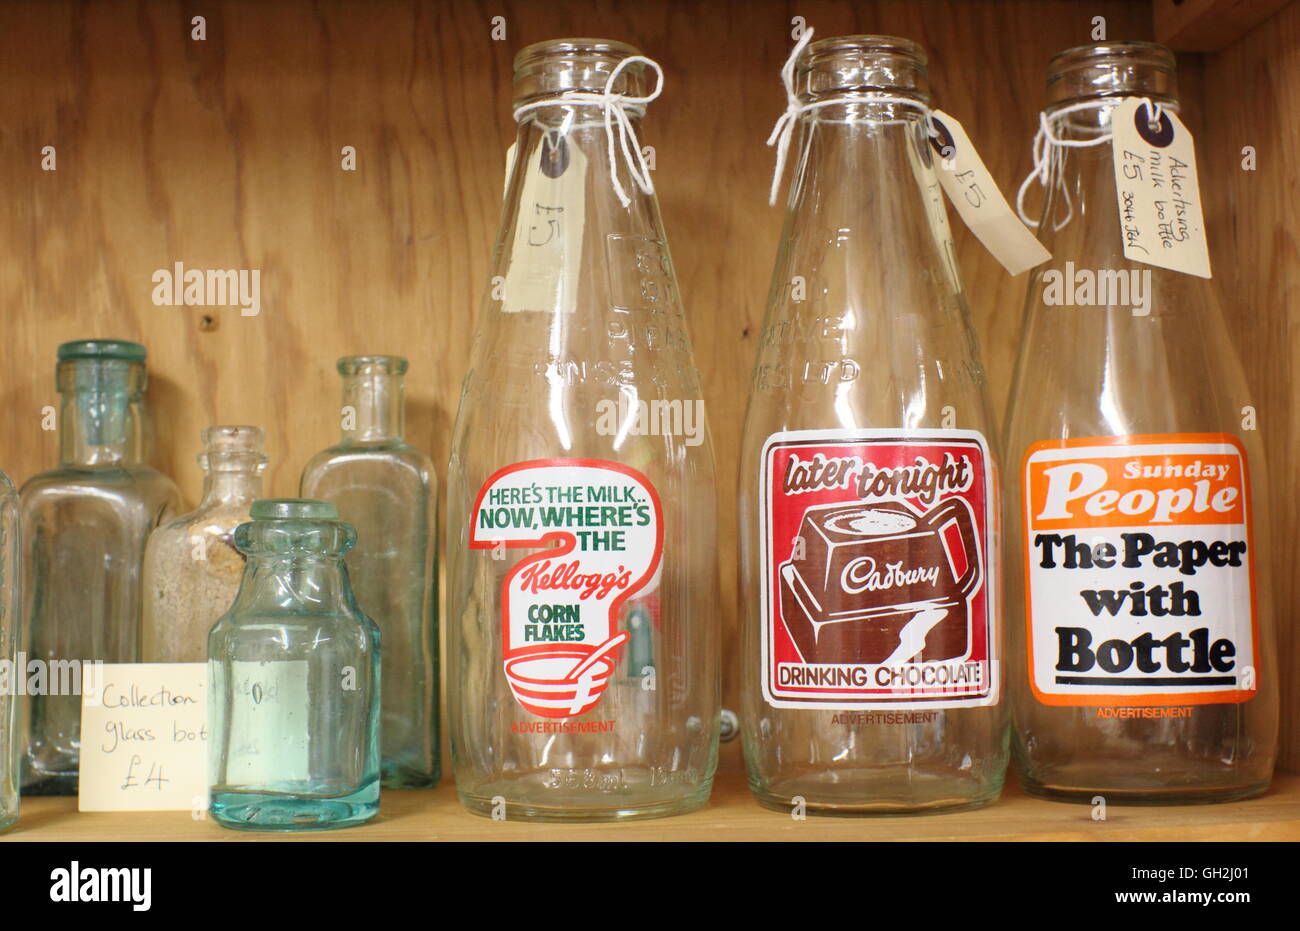 Vintage bottles on sale display featuring advertisements for Kellogs, Cadbury and the Sunday People newspaper Stock Photo